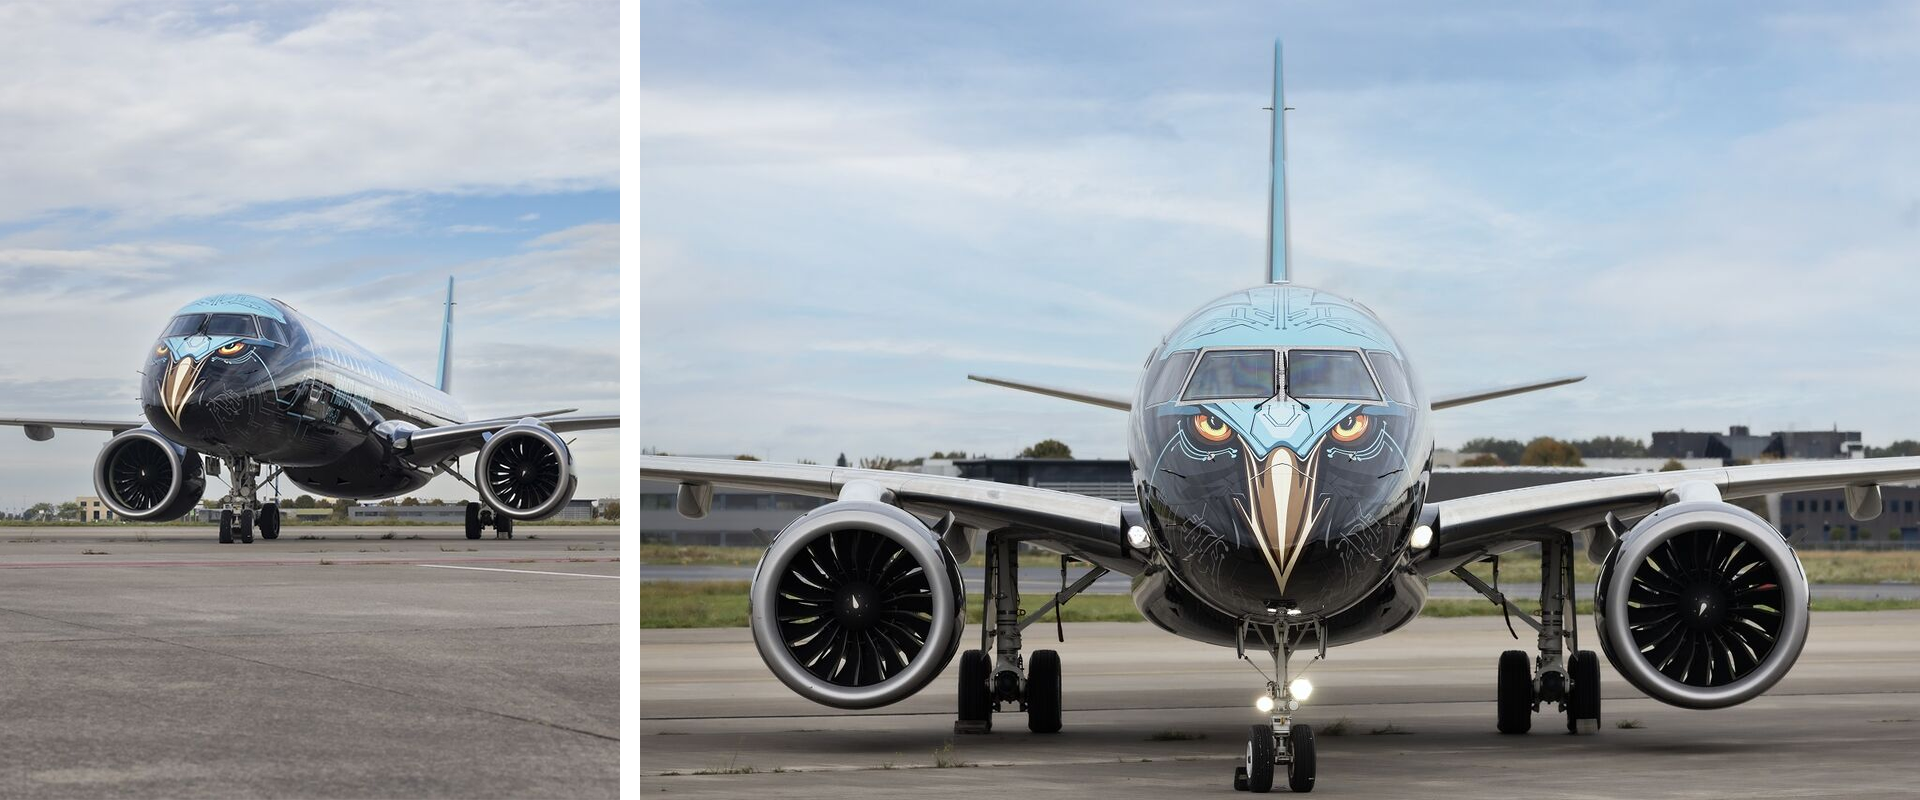 7 of the most unusual and impressive aircraft liveries, MTB Events. Image shows an Embraer plane painted like an eagle.